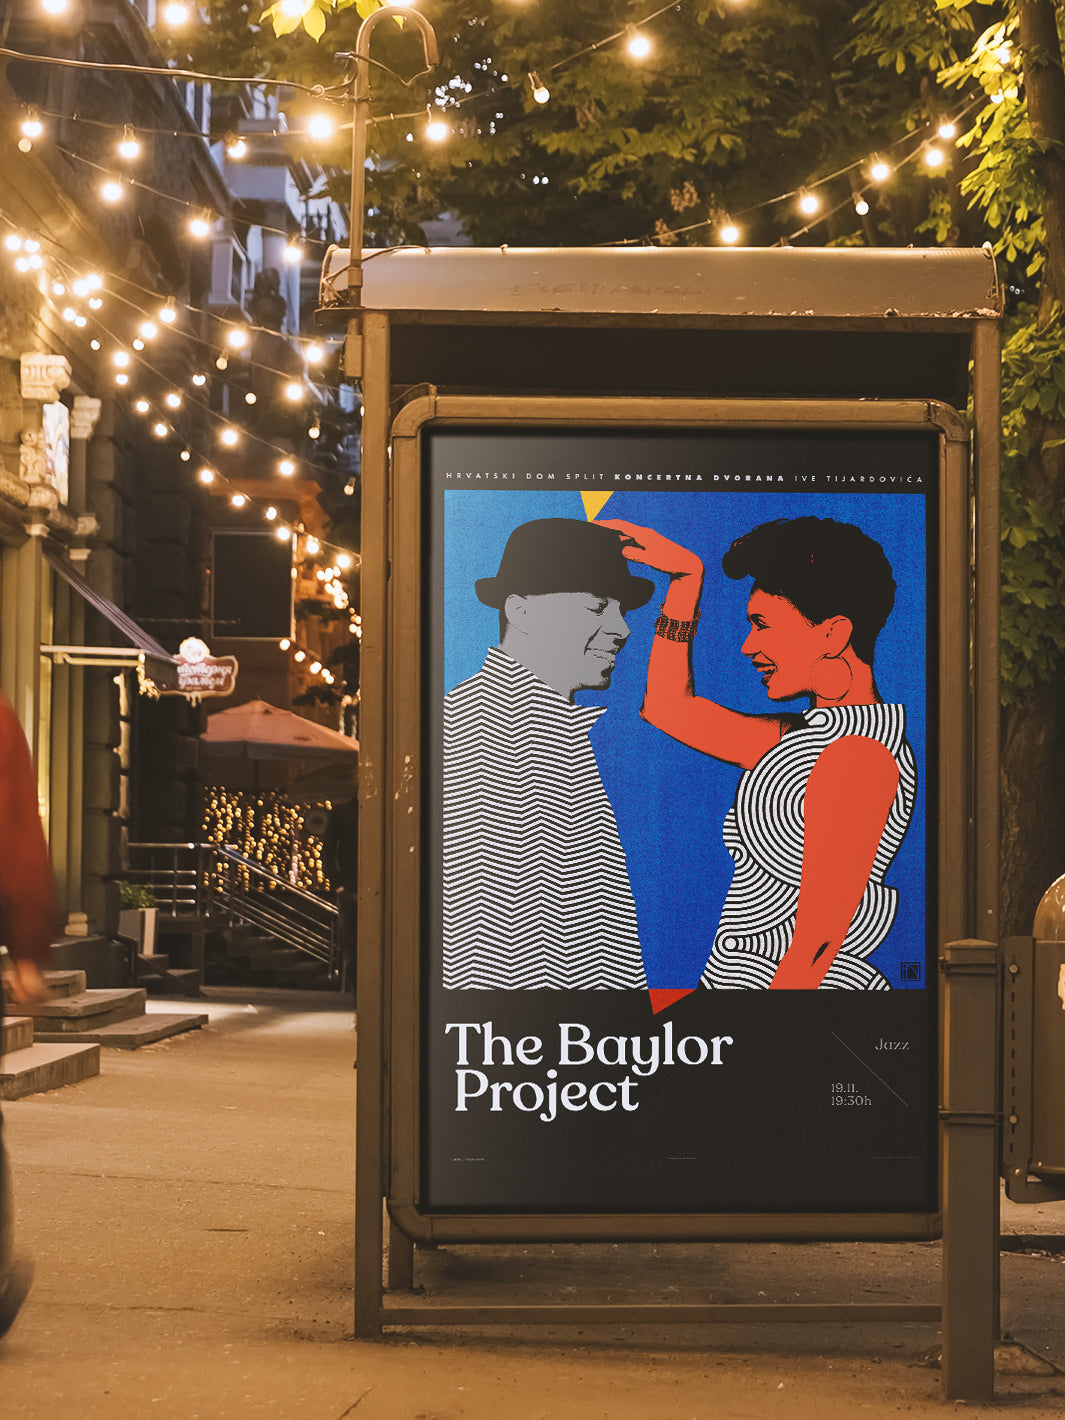 The Baylor Project